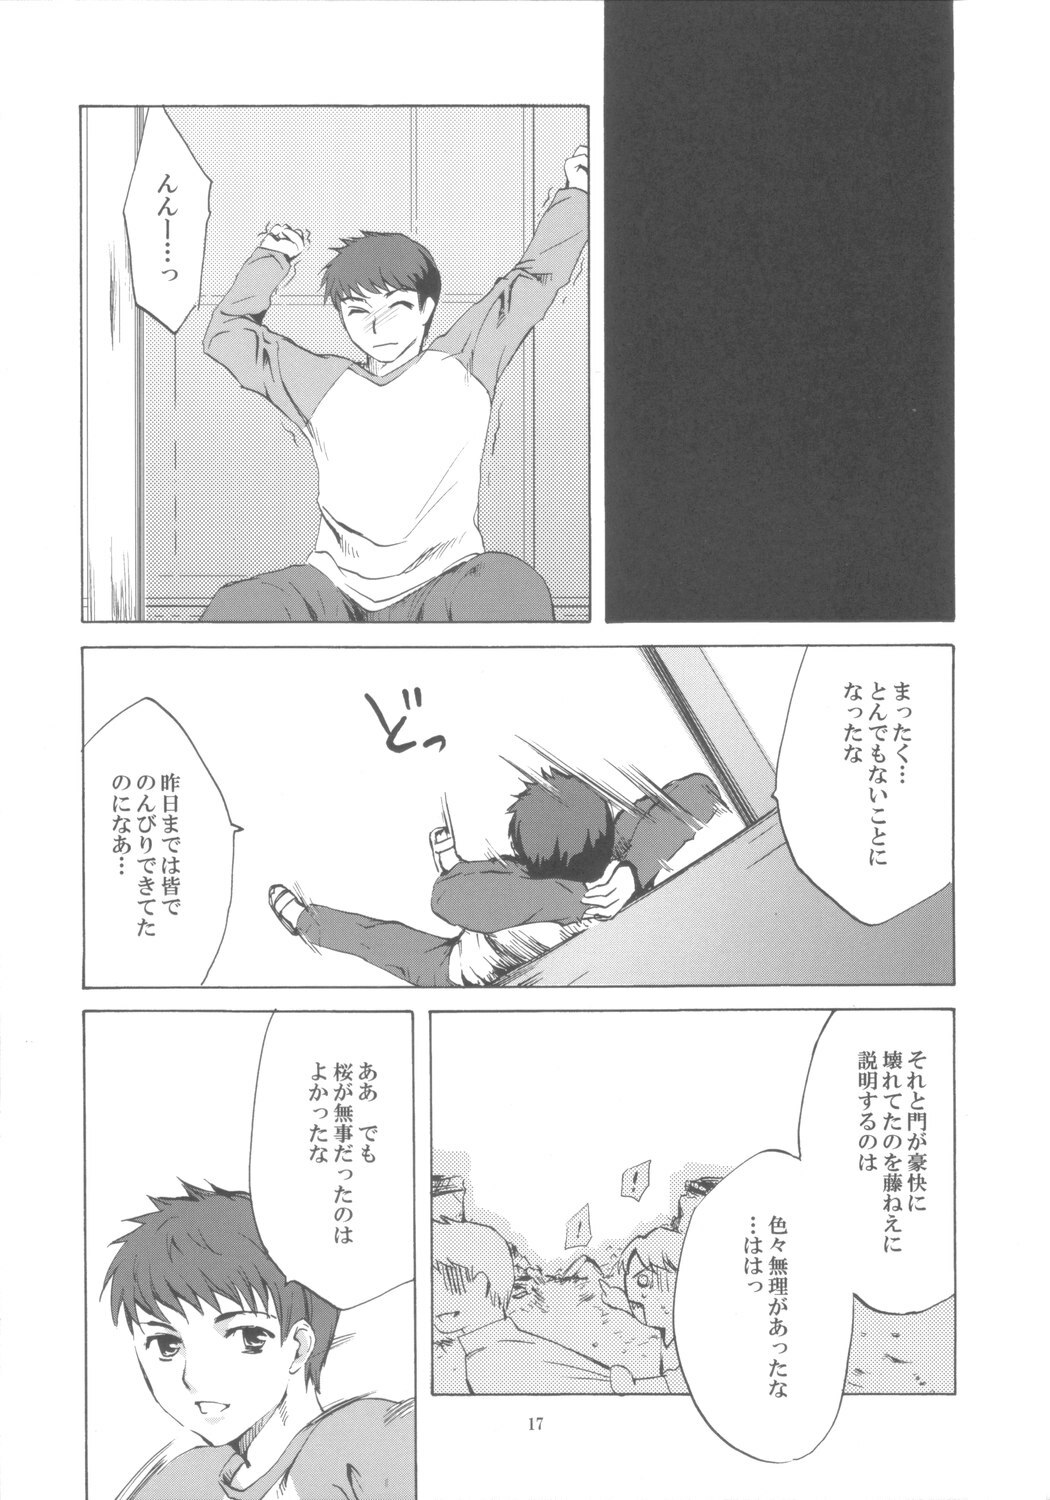 (CR37) [Clover Kai (Emua)] Face III stay memory so truth (Fate/stay night) page 16 full